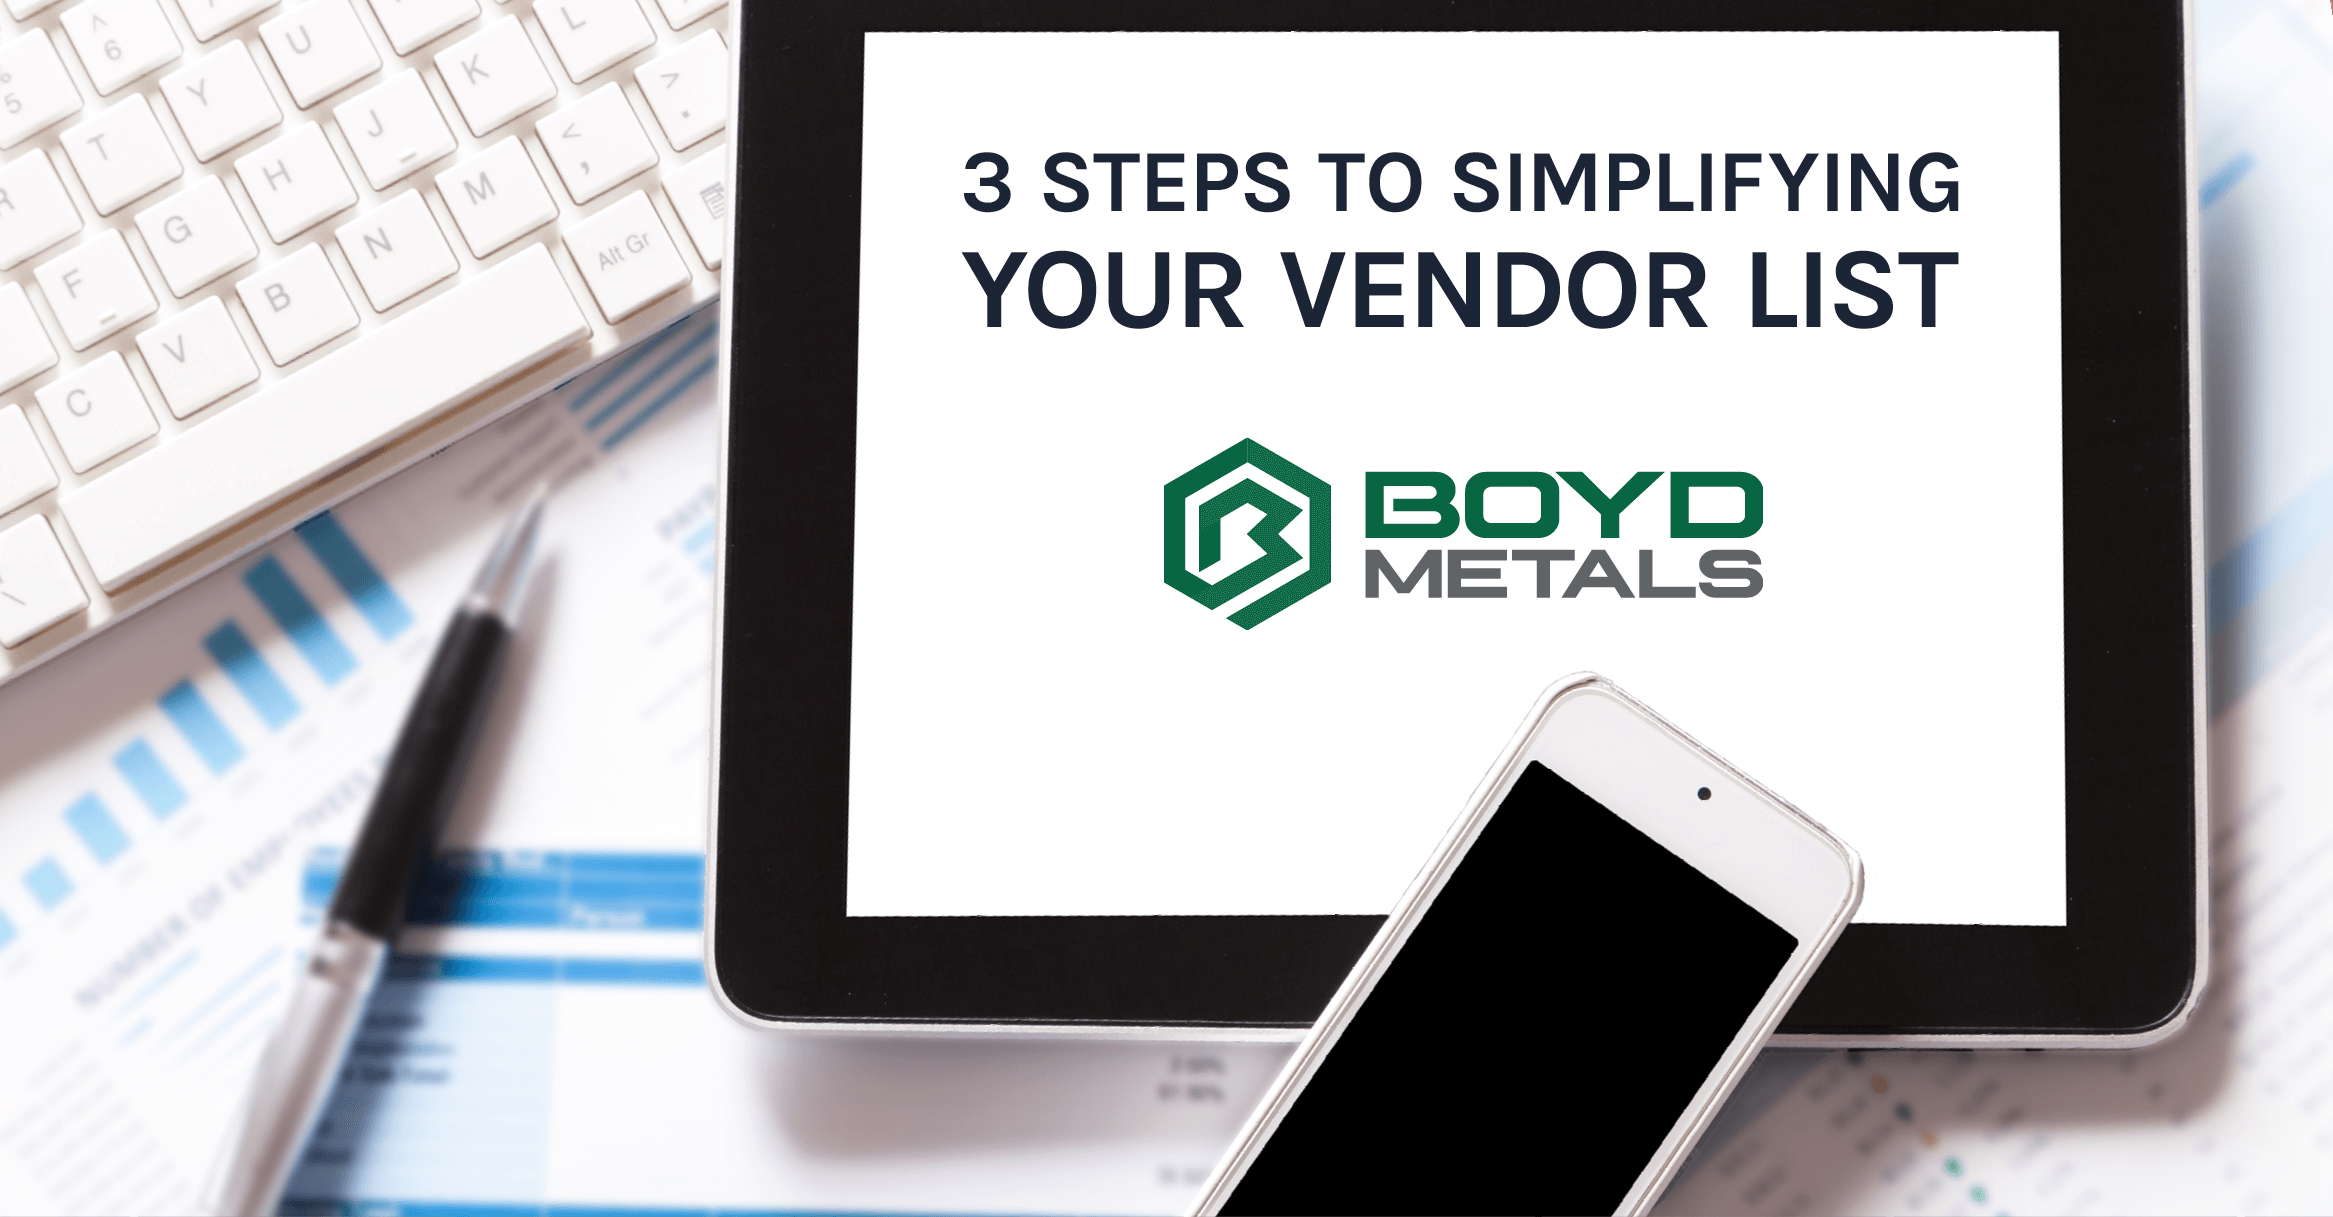 3 Steps to Simplifying Your Vendor List